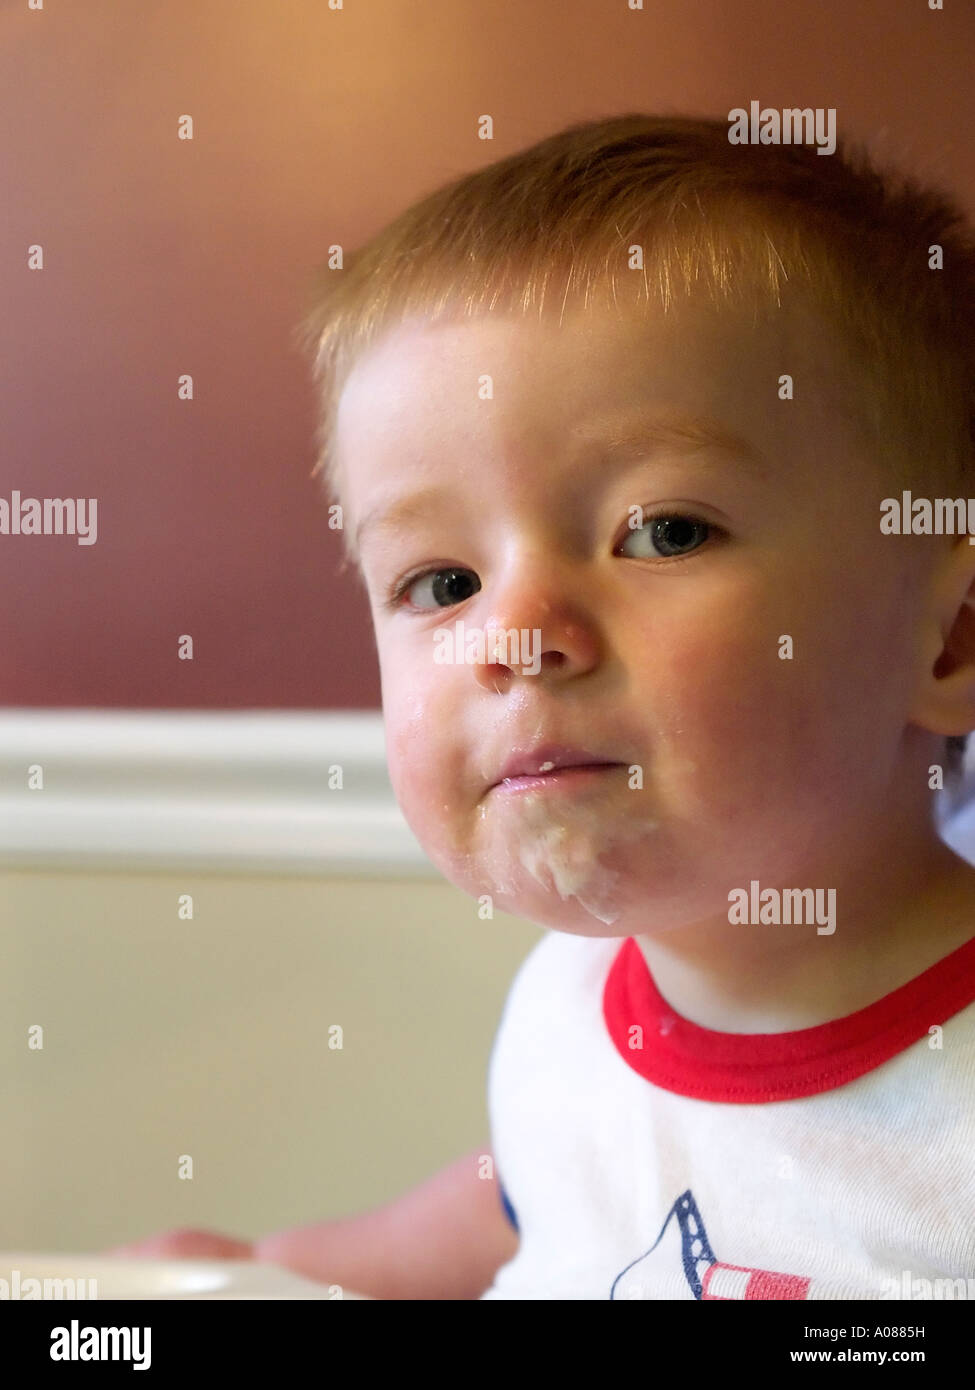 Toddler eating breakfast and getting a little messy while doing it Stock Photo